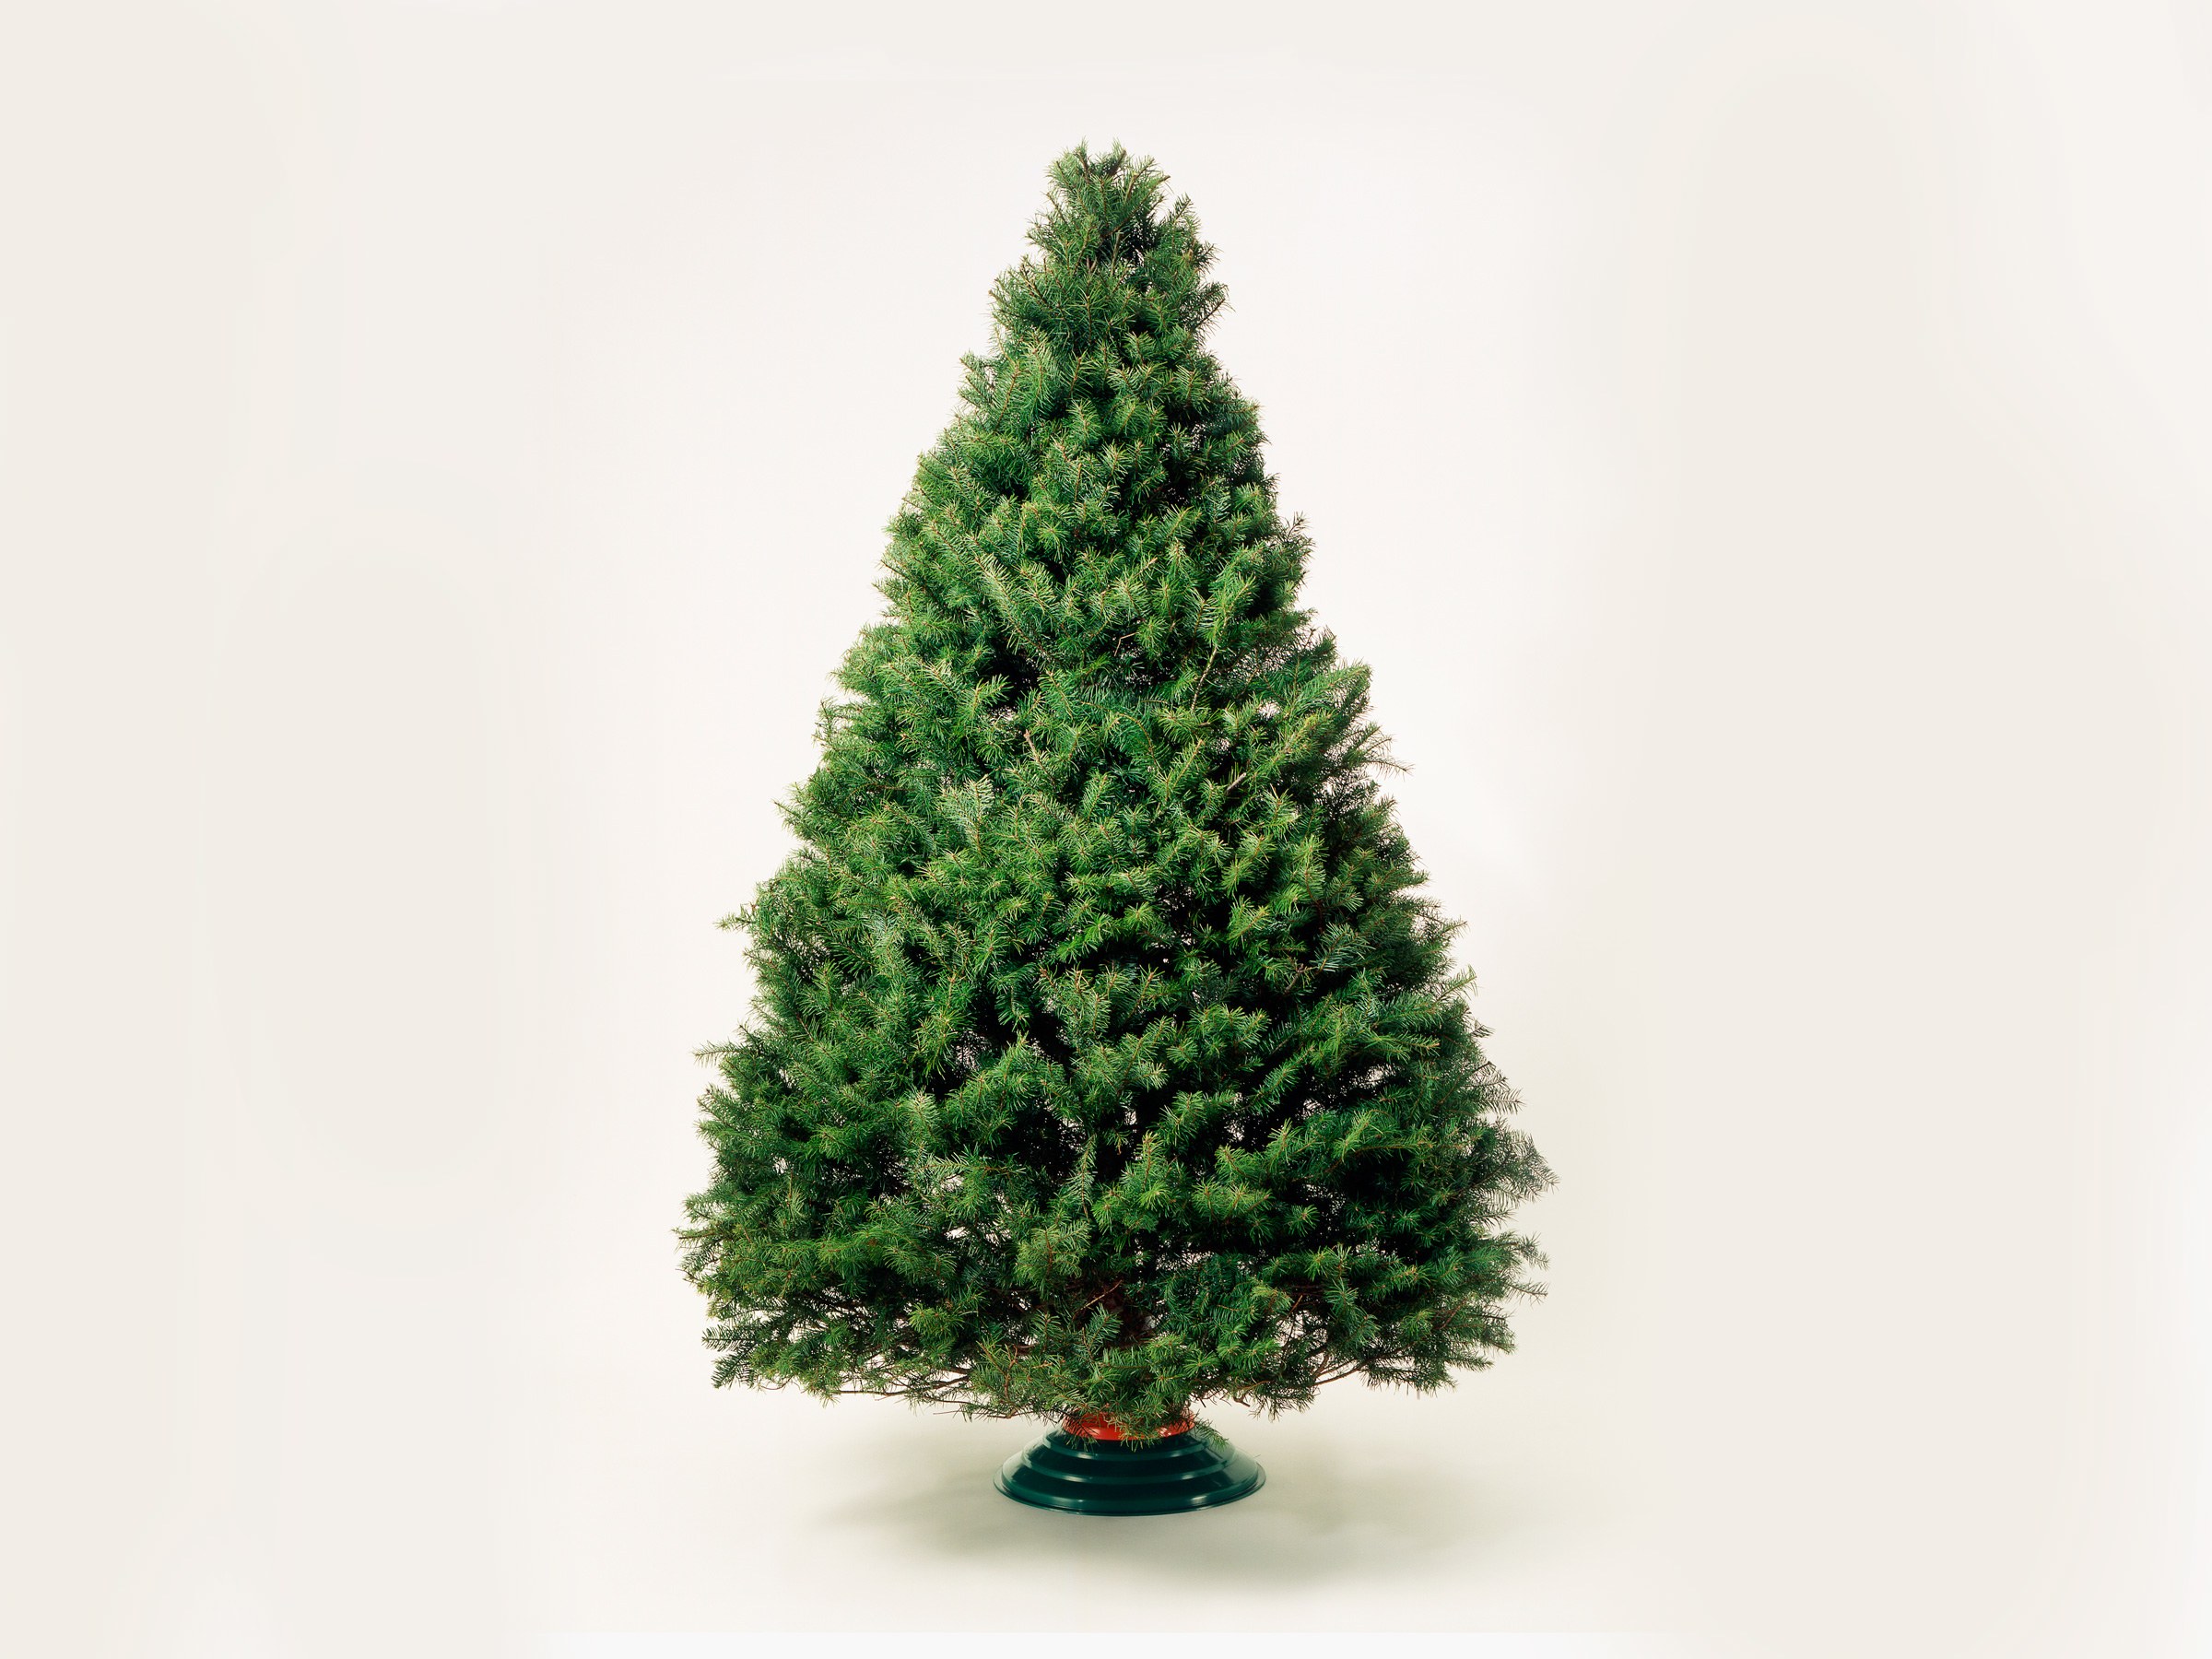 Using Genetics to Make a More Perfect Christmas Tree | WIRED